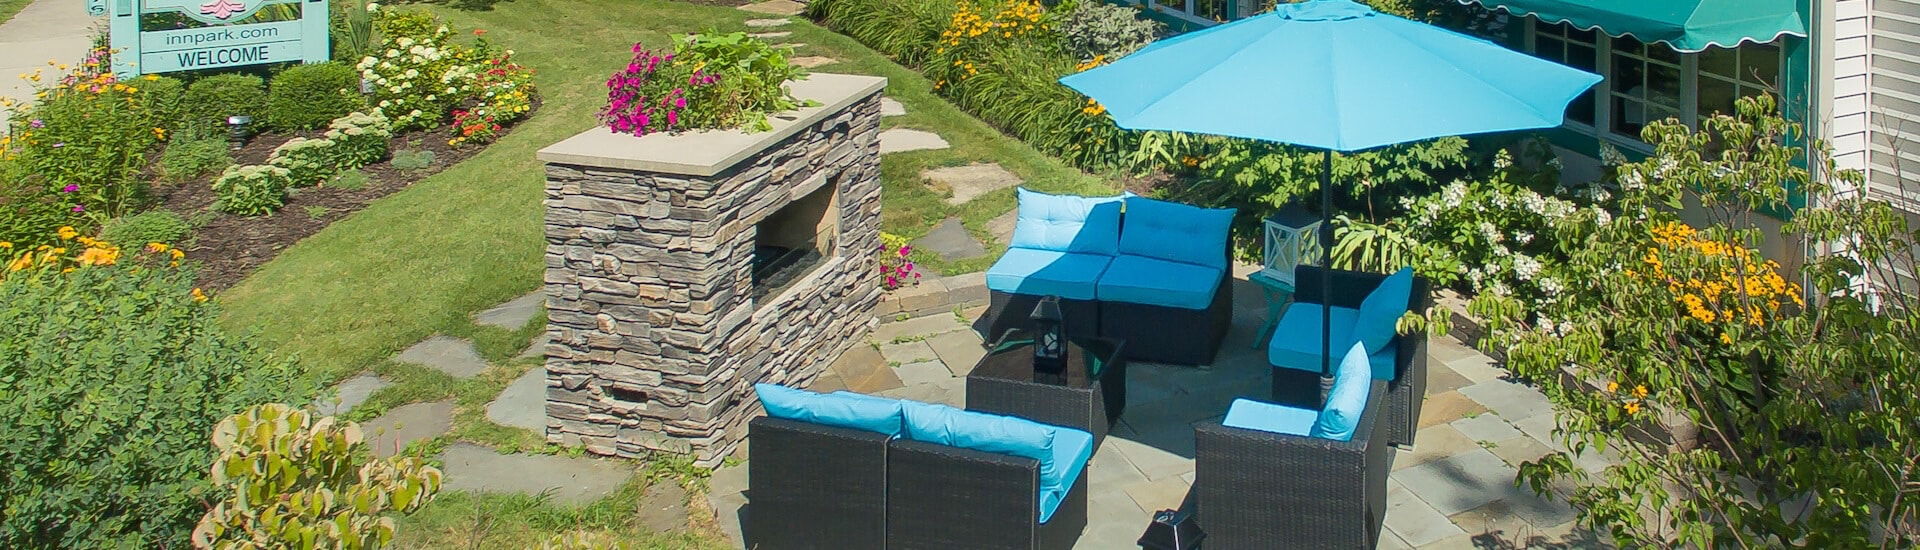 An outside patio area with wicker furniture with bright blue cushions and umbrella, facing a brick fireplace, green grass, bushes, and lots of flowers throughout.